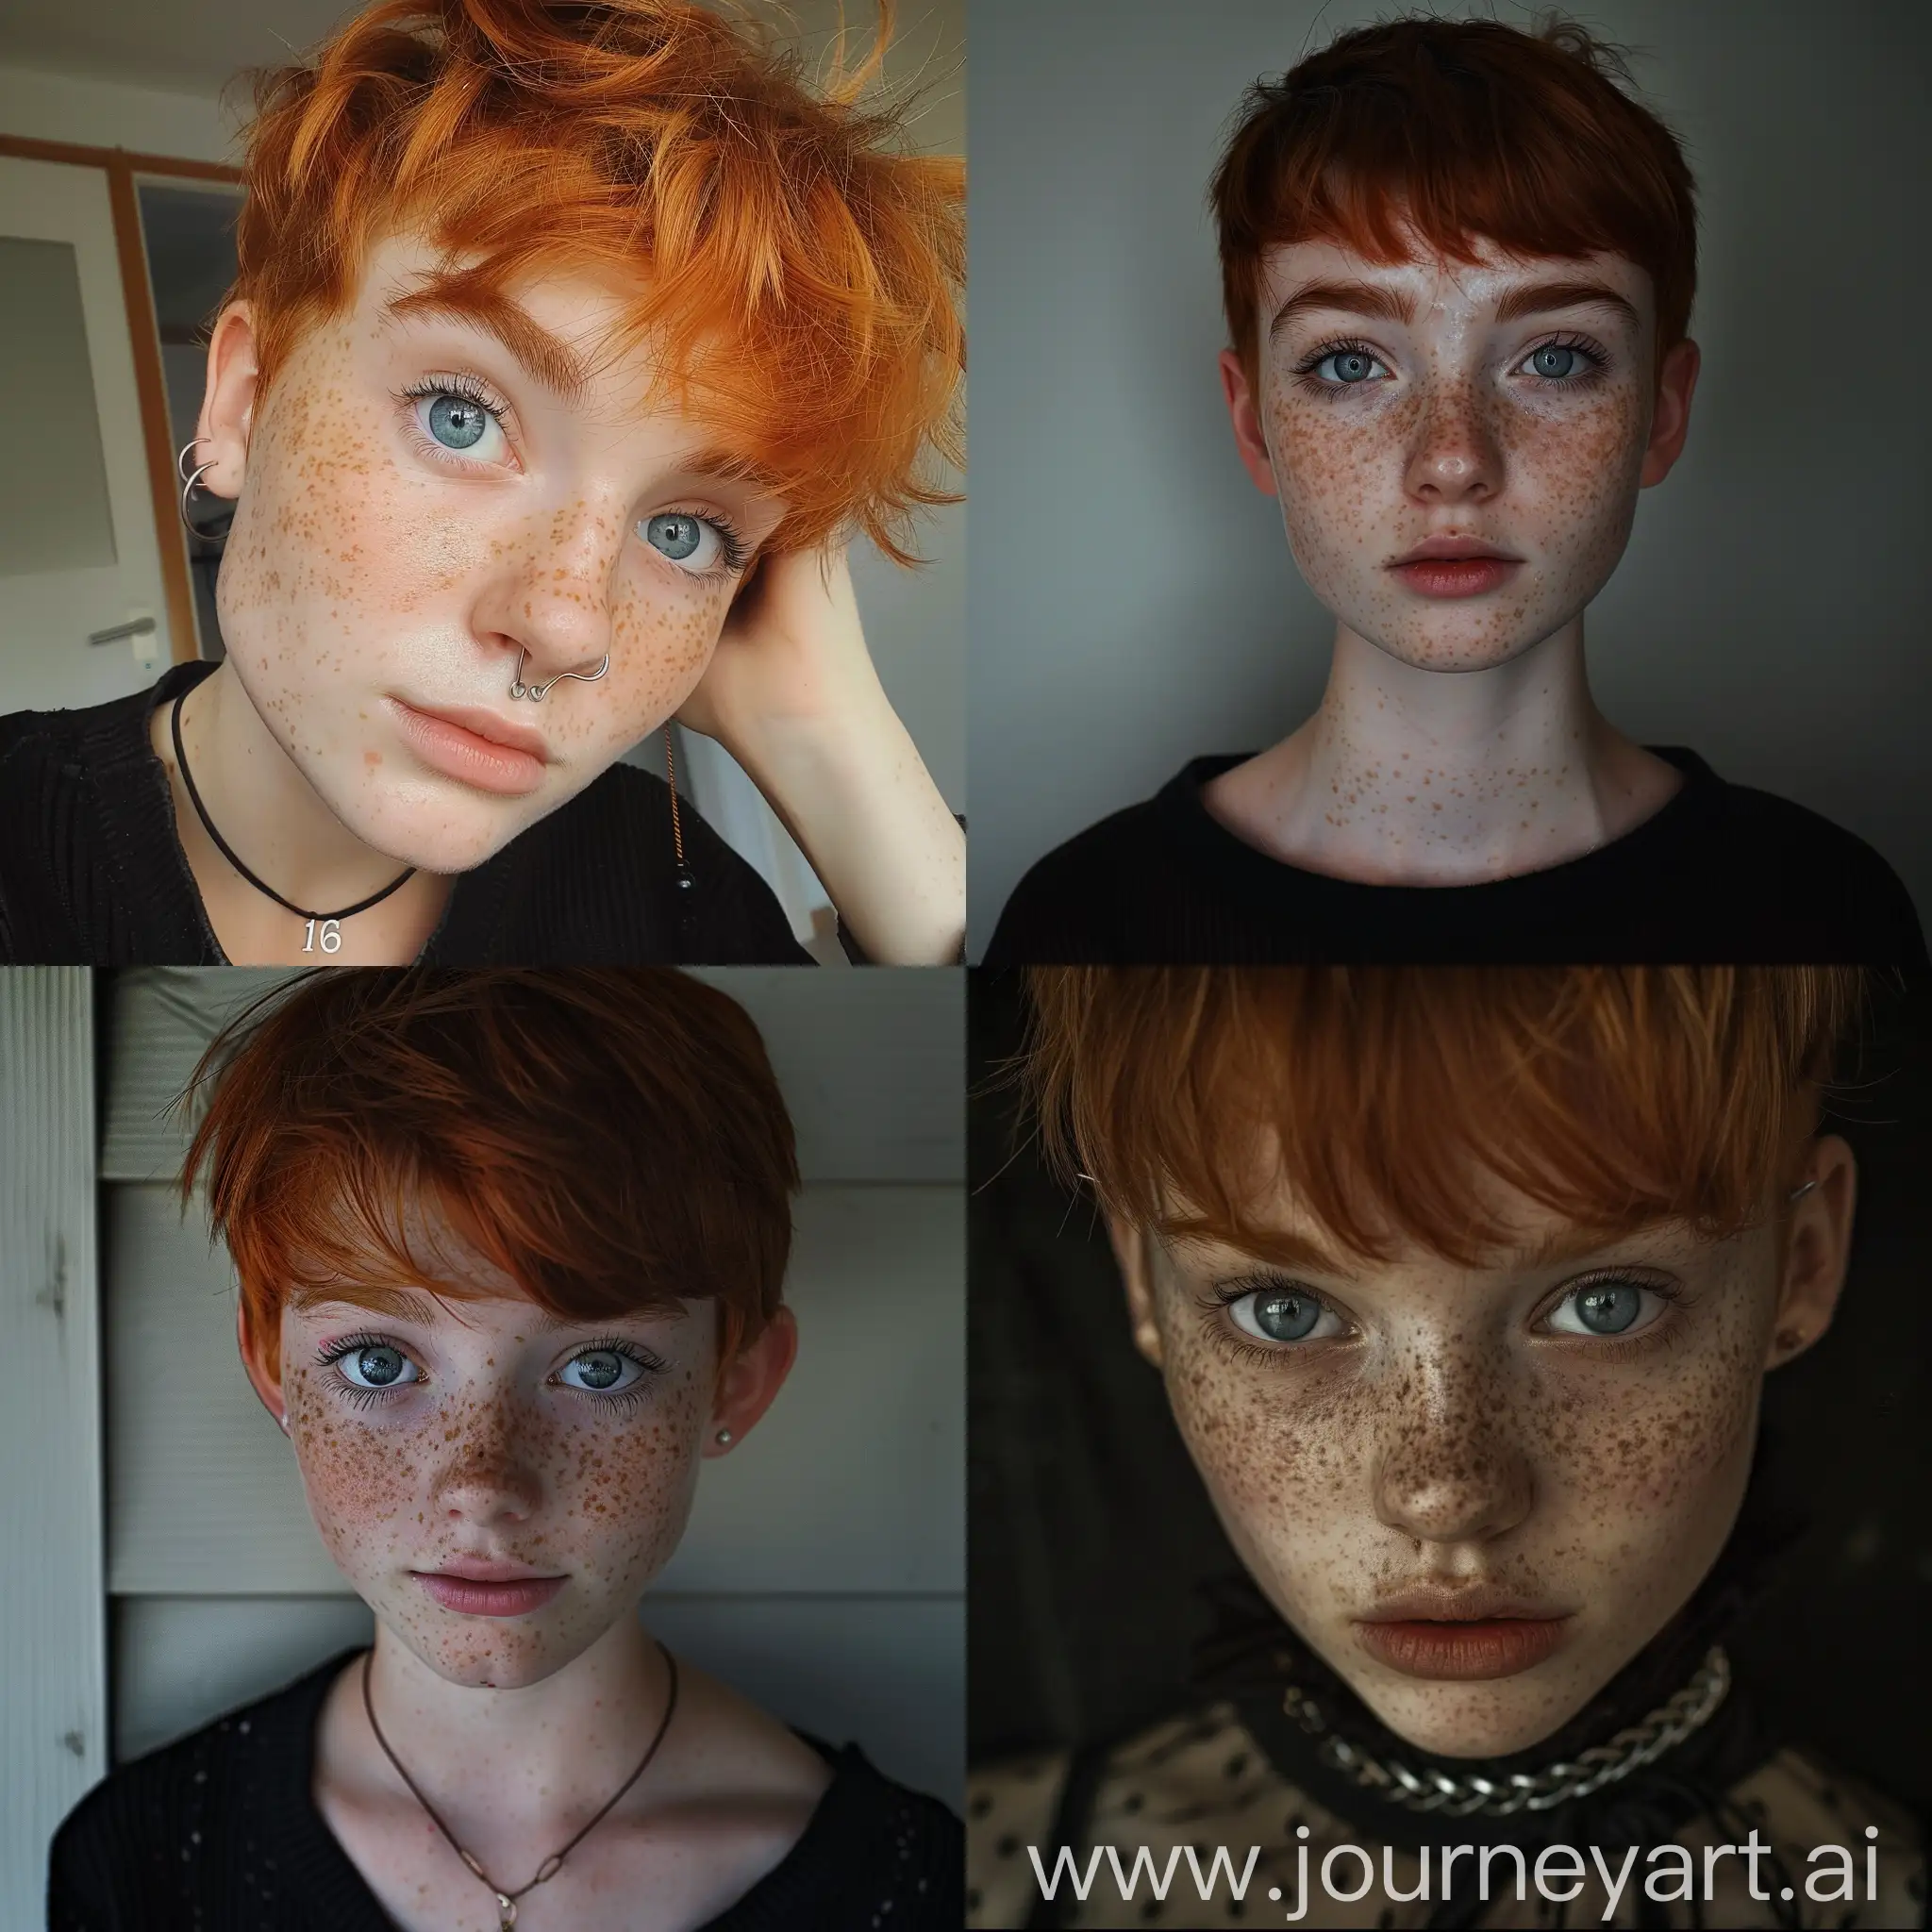 16 year old girl, goth, pixie cut, red hair, freckles, icy blue eyes